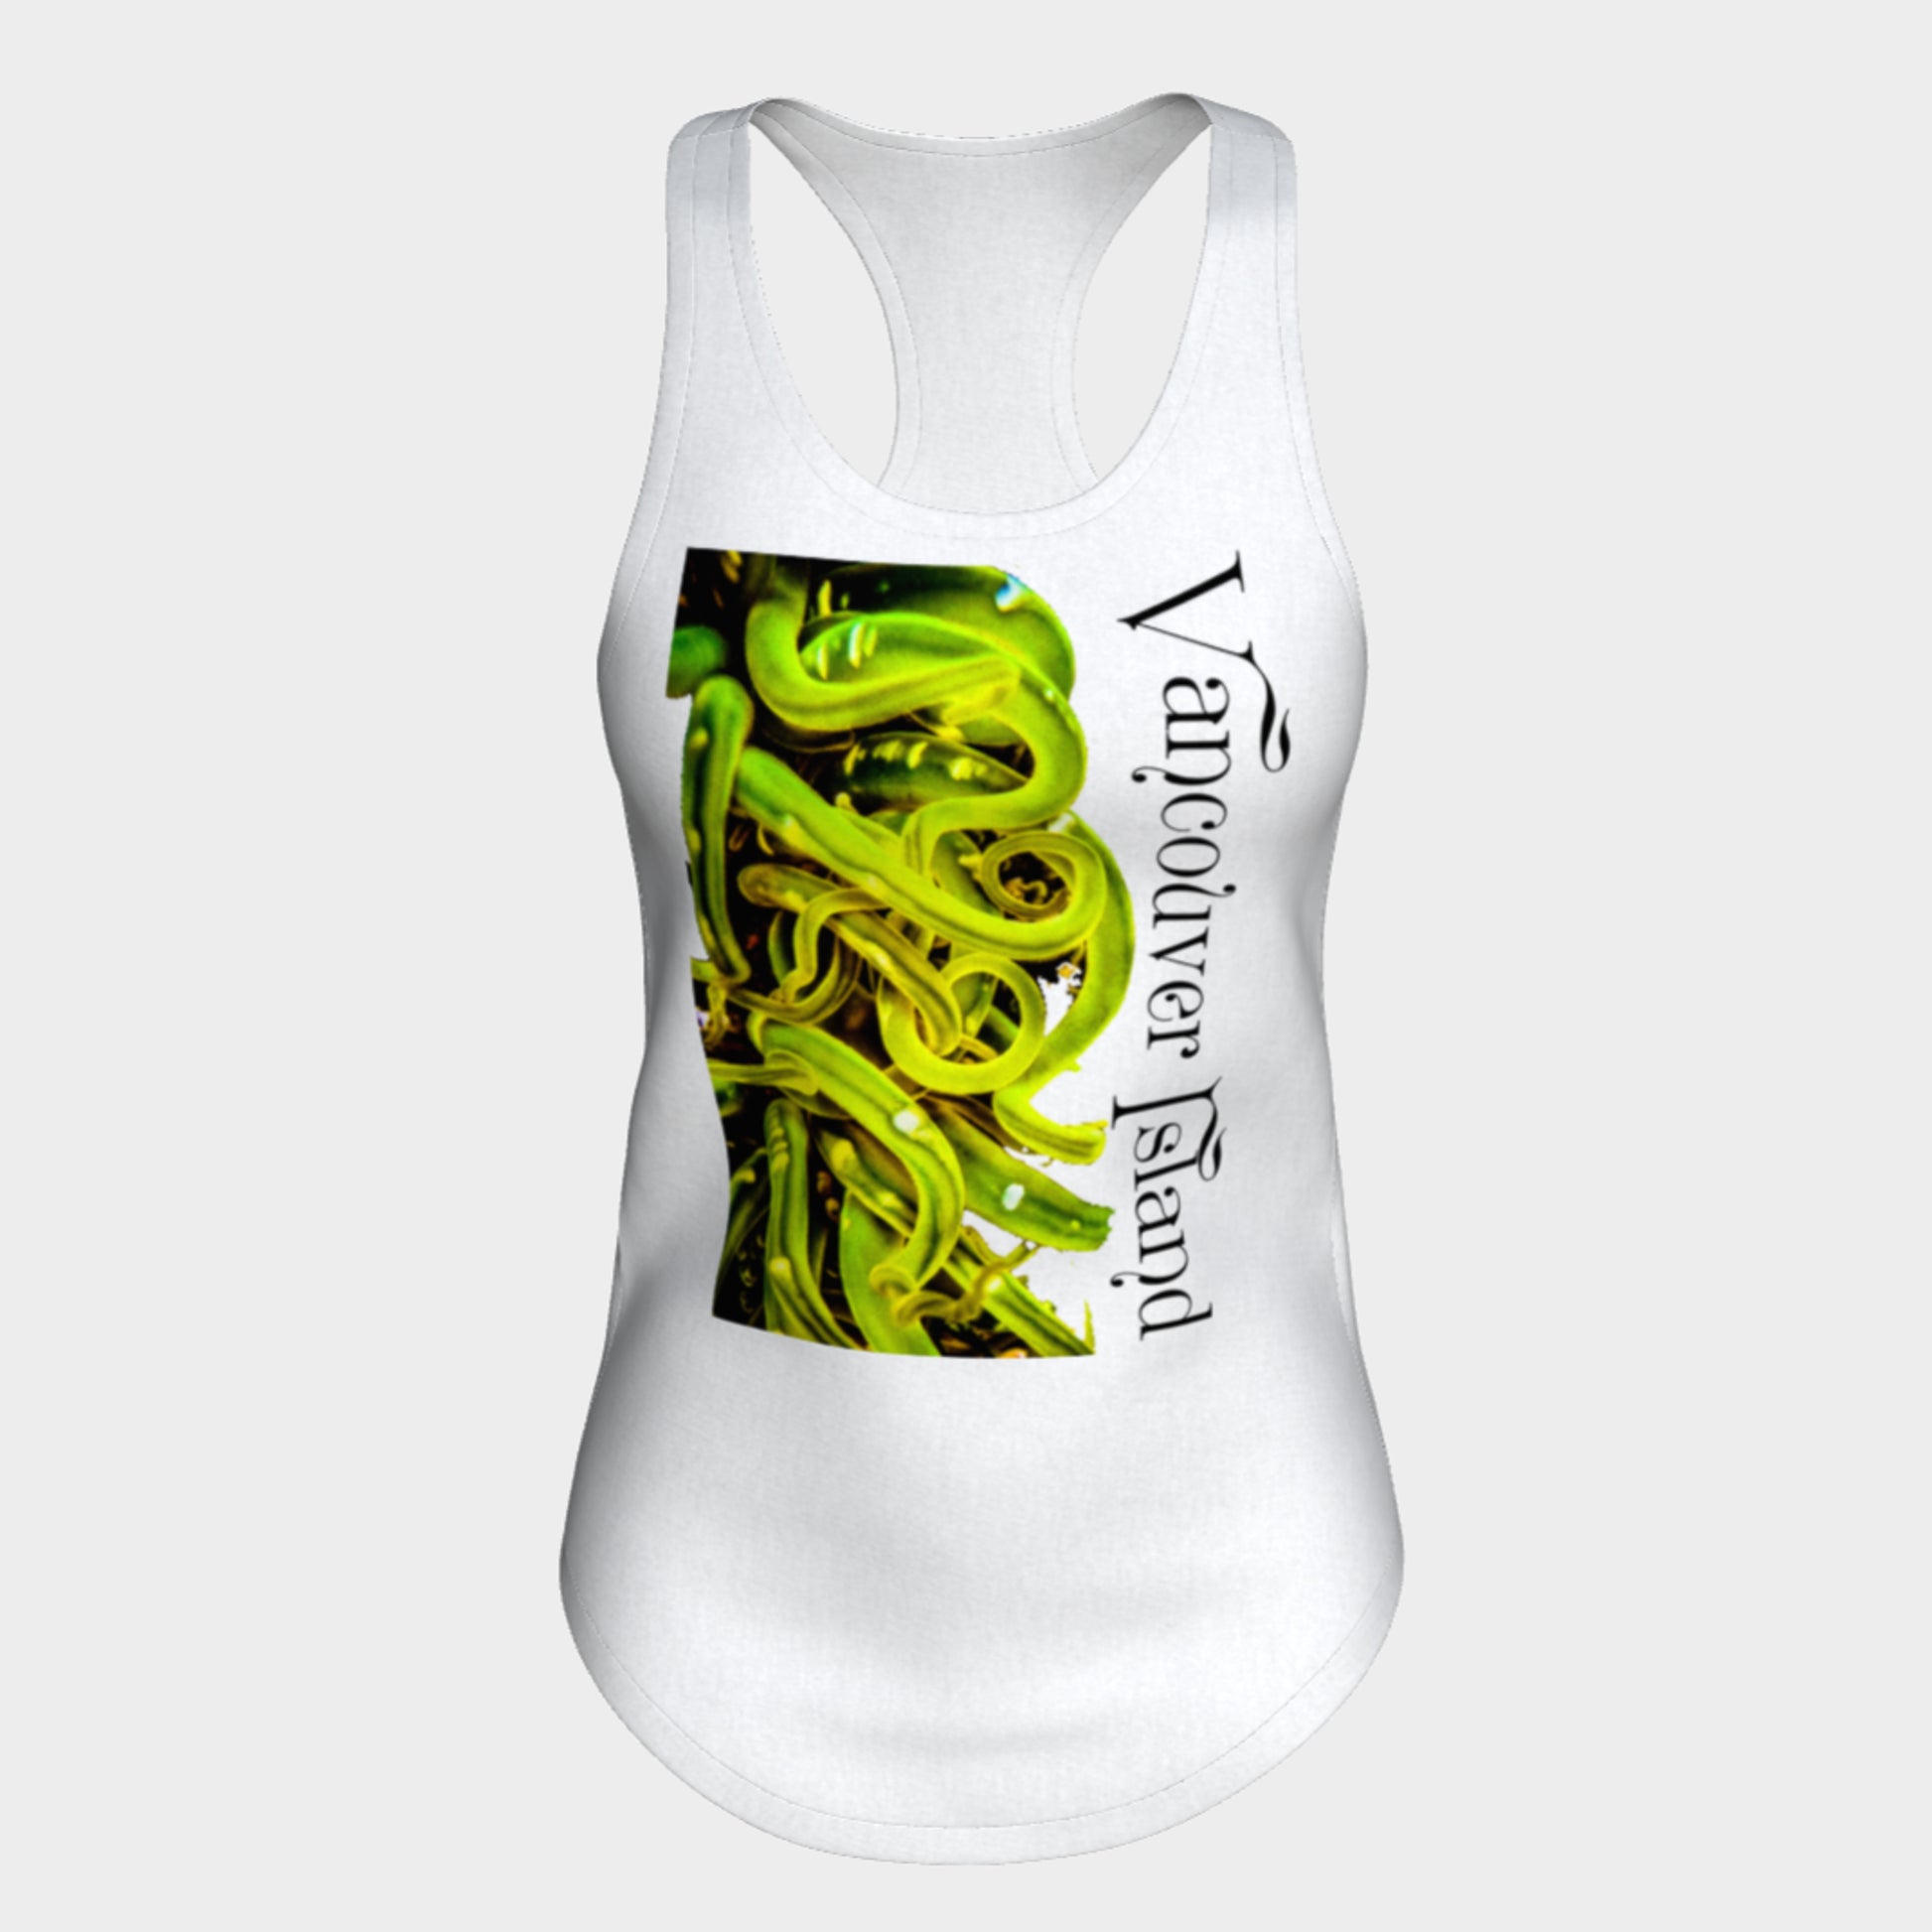 Sea Anemone Vancouver Island Racerback Tank Top  Excellent choice for the summer or for working out.   Made from 60% spun cotton and 40% poly for a mix of comfort and performance, you get it all (including my photography and digital art) with this custom printed racerback tank top.   Van Isle Goddess Next Level racerback tank top will quickly become you go-to tank top because of the super comfy fit!